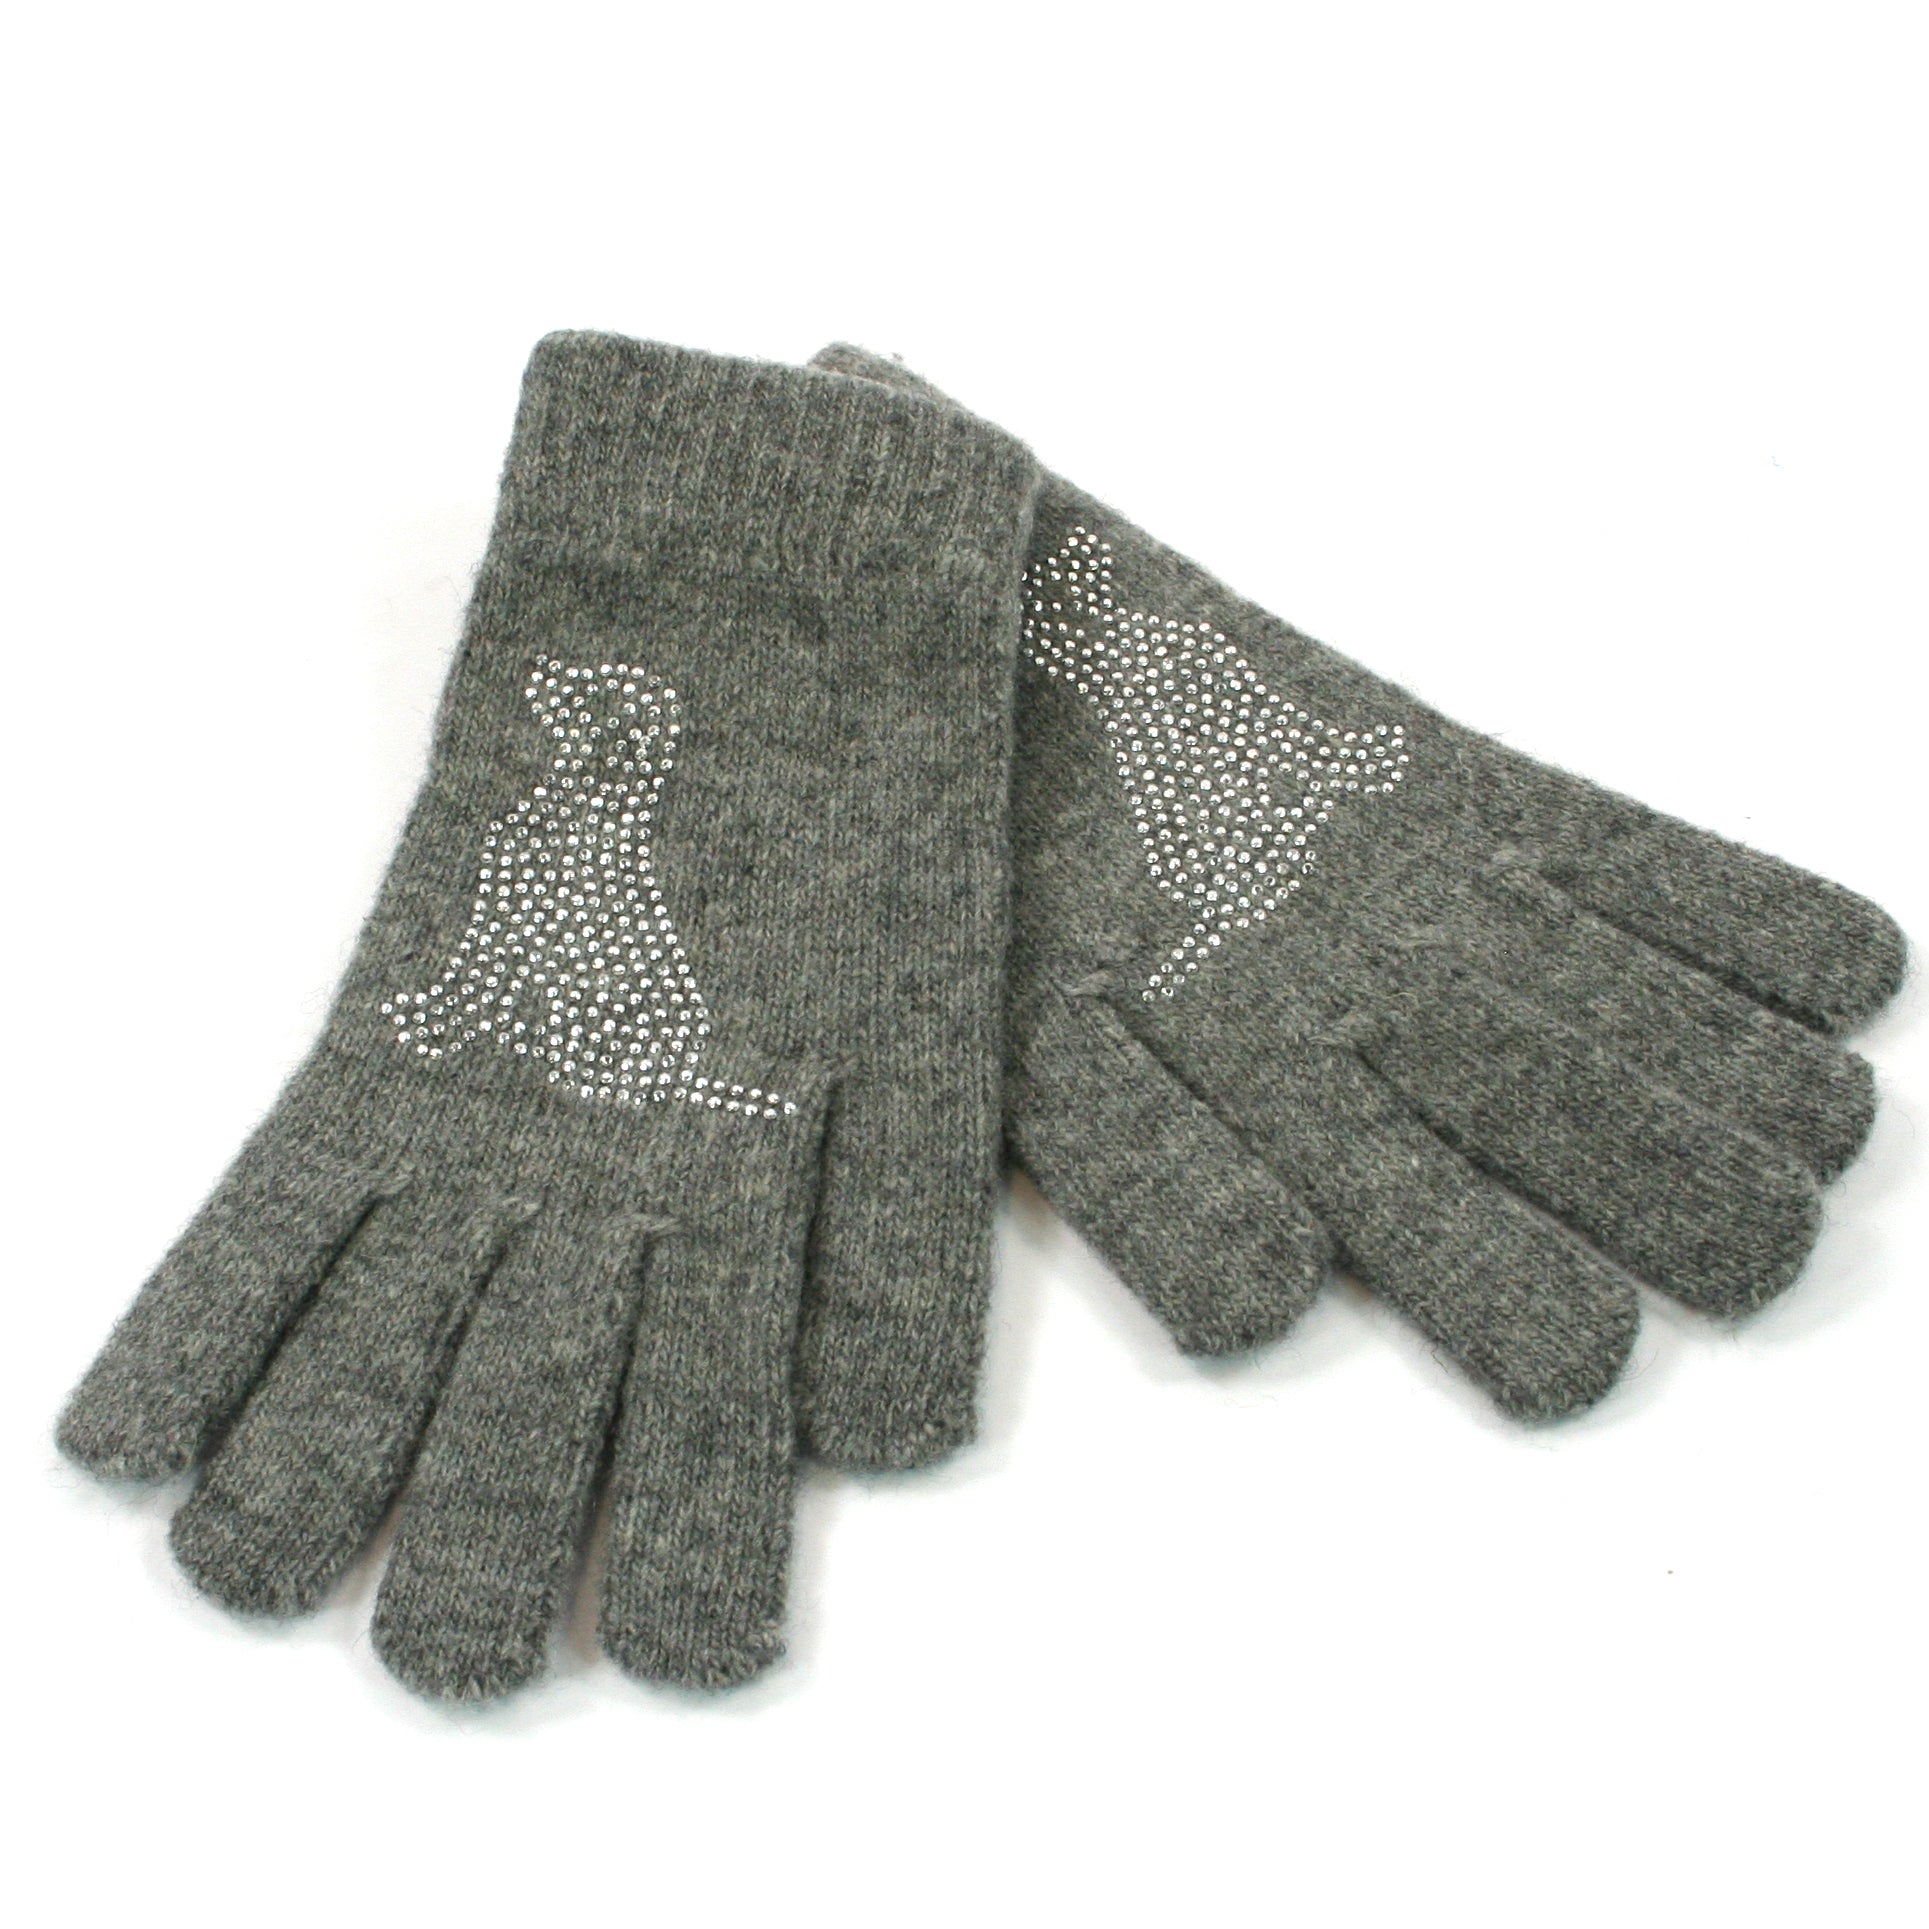 warm gloves with a diamante dog pattern